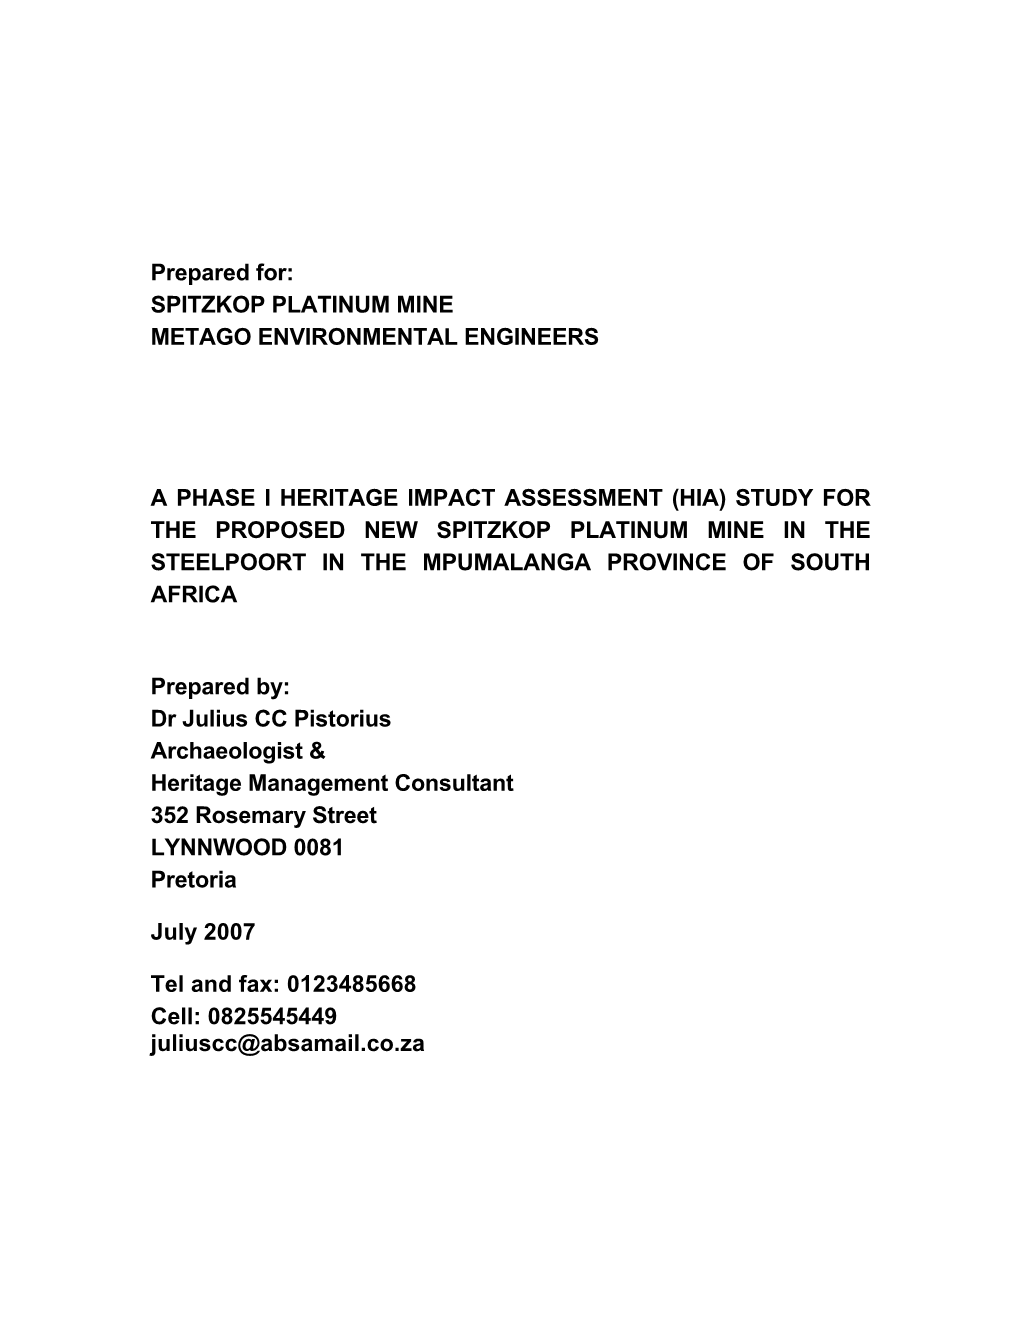 Prepared For: SPITZKOP PLATINUM MINE METAGO ENVIRONMENTAL ENGINEERS a PHASE I HERITAGE IMPACT ASSESSMENT (HIA) STUDY for THE